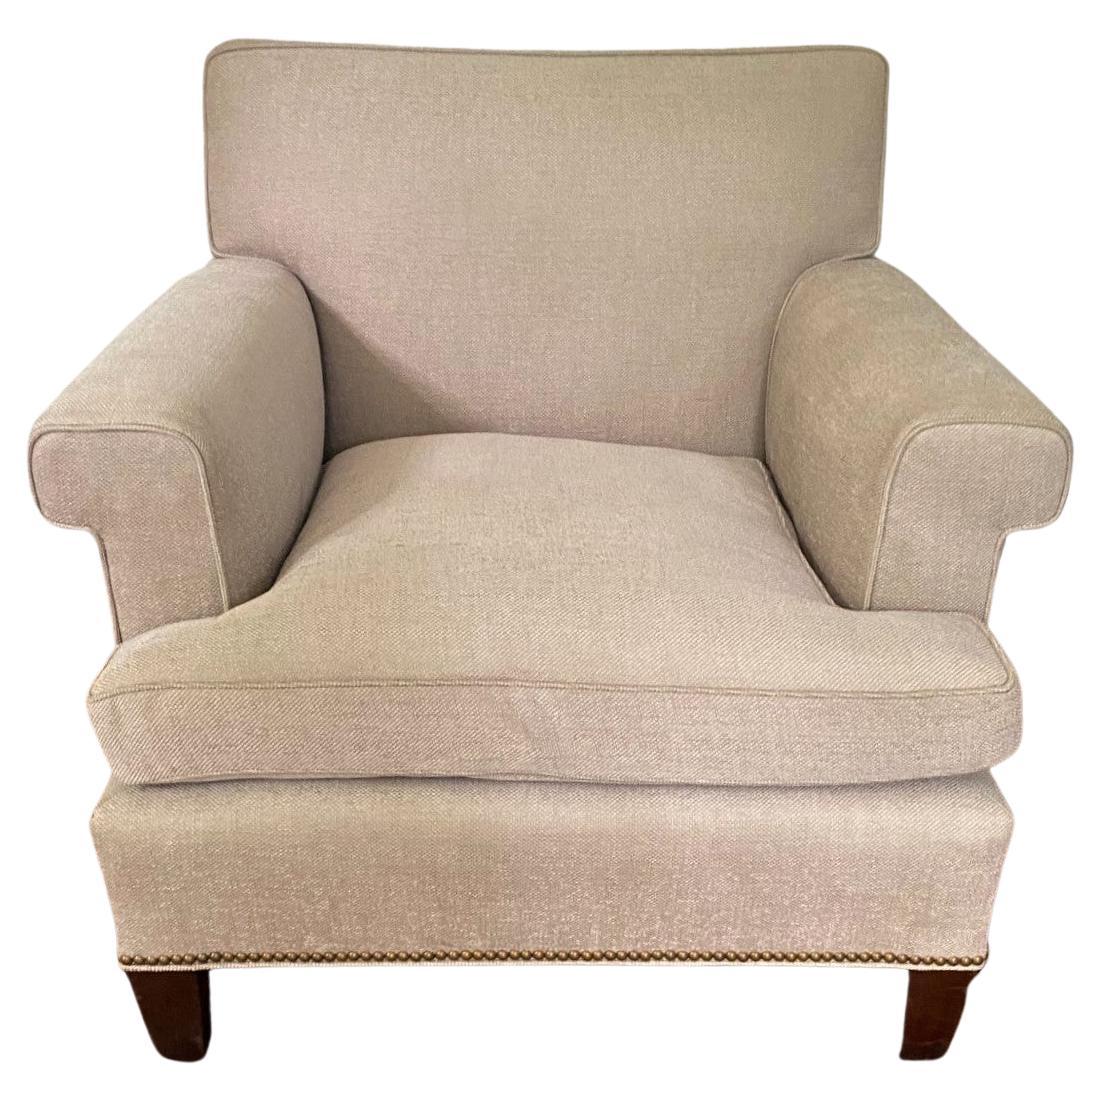 New Lawson Style Lounge Chair with Down Seat Cushion, in Stock